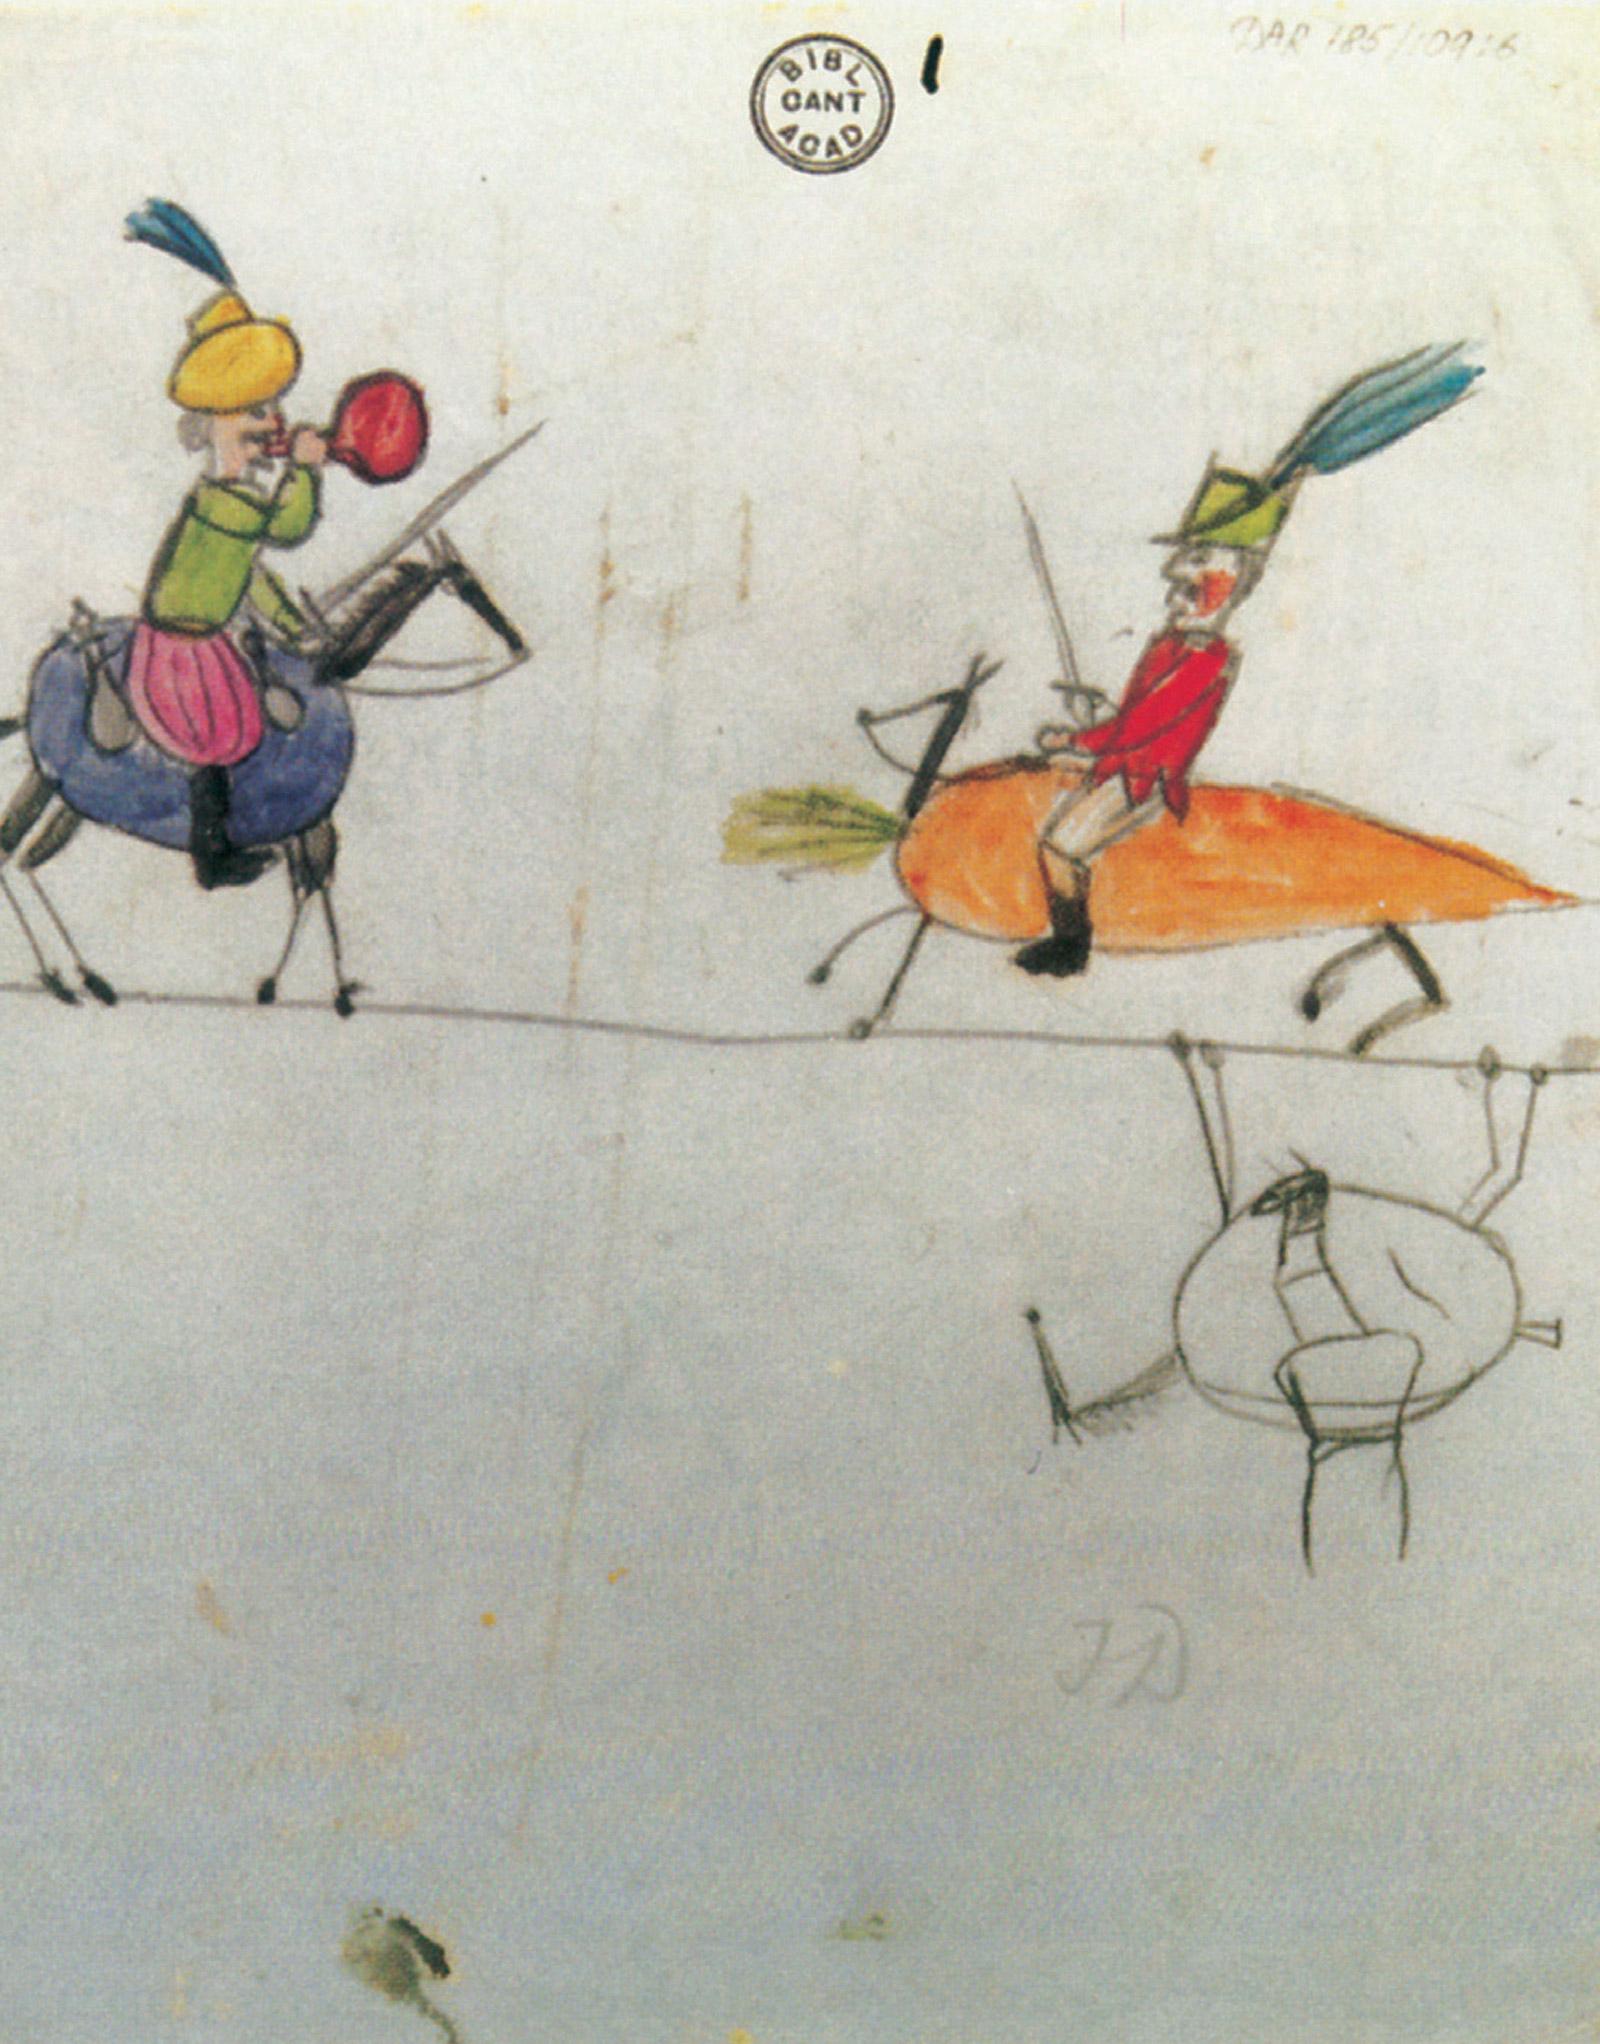 The front of the issue's postcard featuring a childhood drawing from around eighteen fifty by Charles Darwin's son Francis titled 